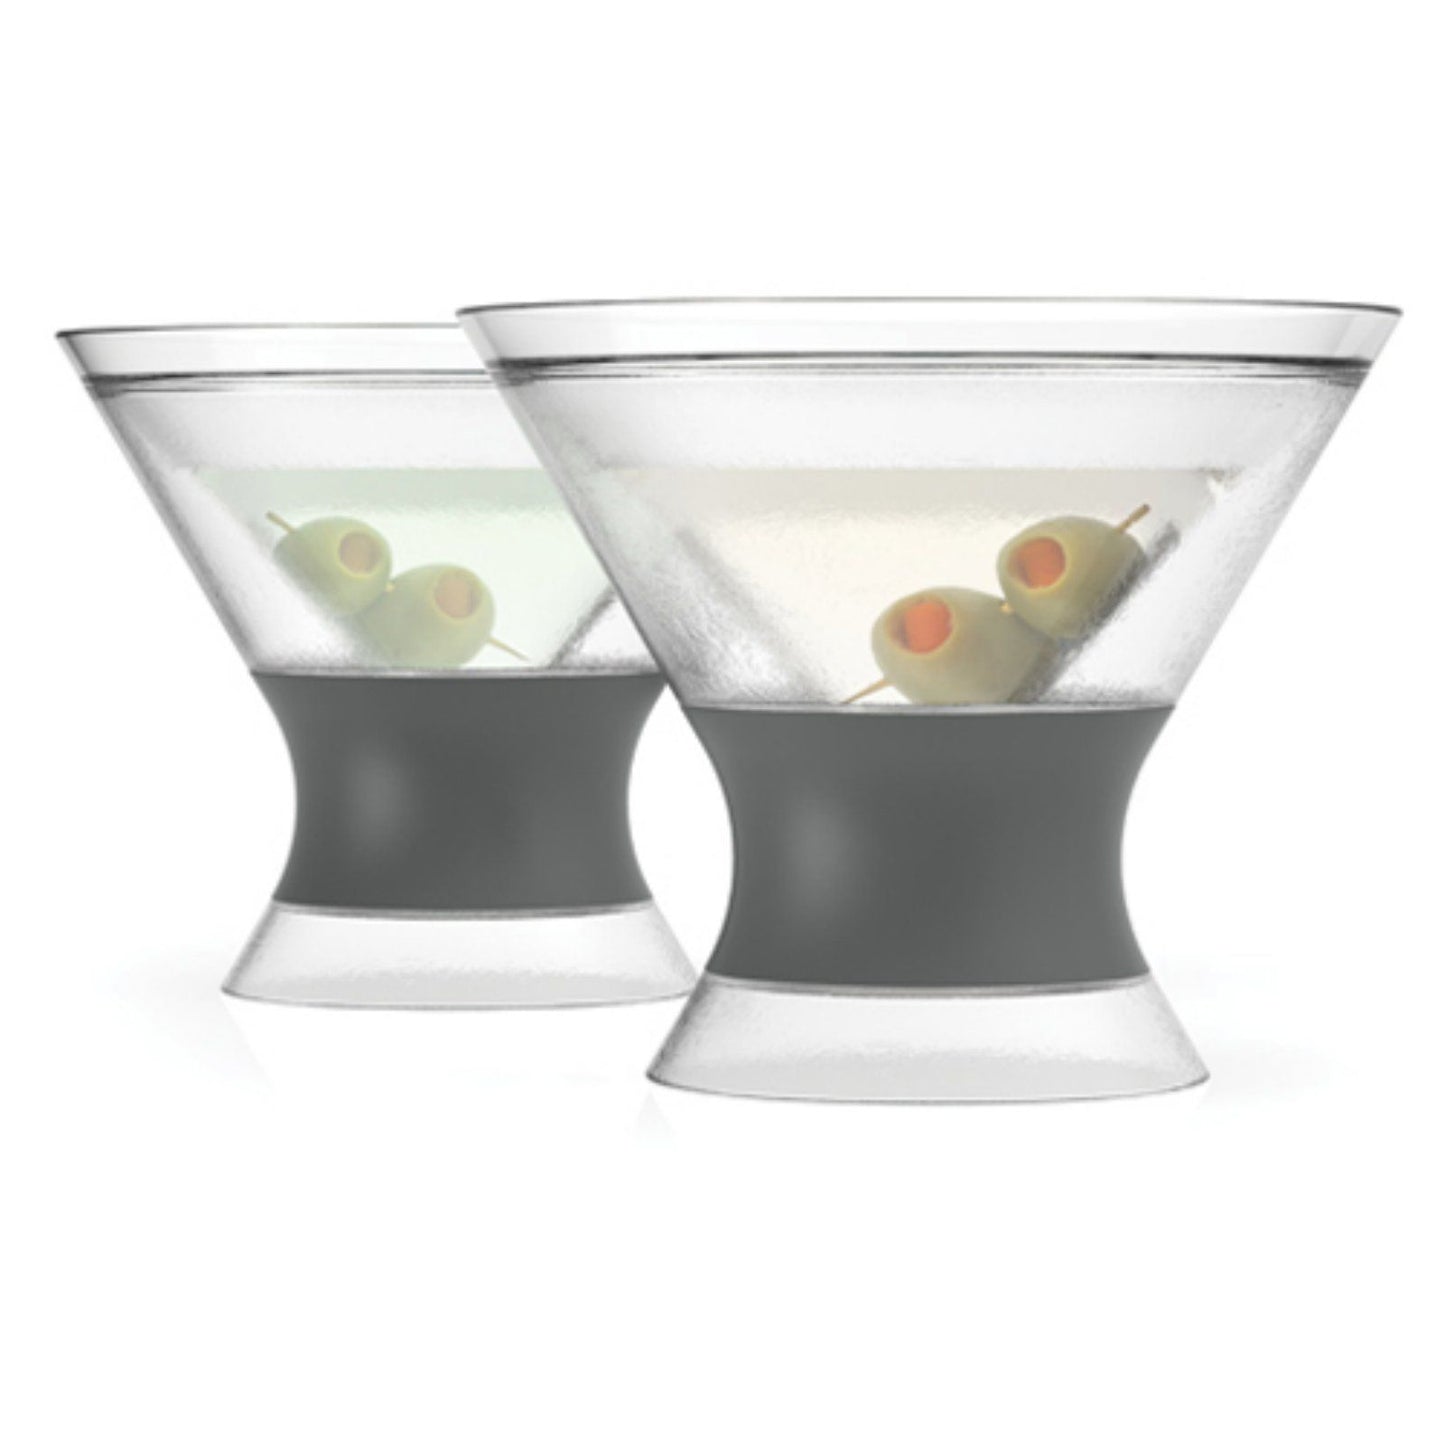 Martini Freeze Cooling Cups (Set of 2)